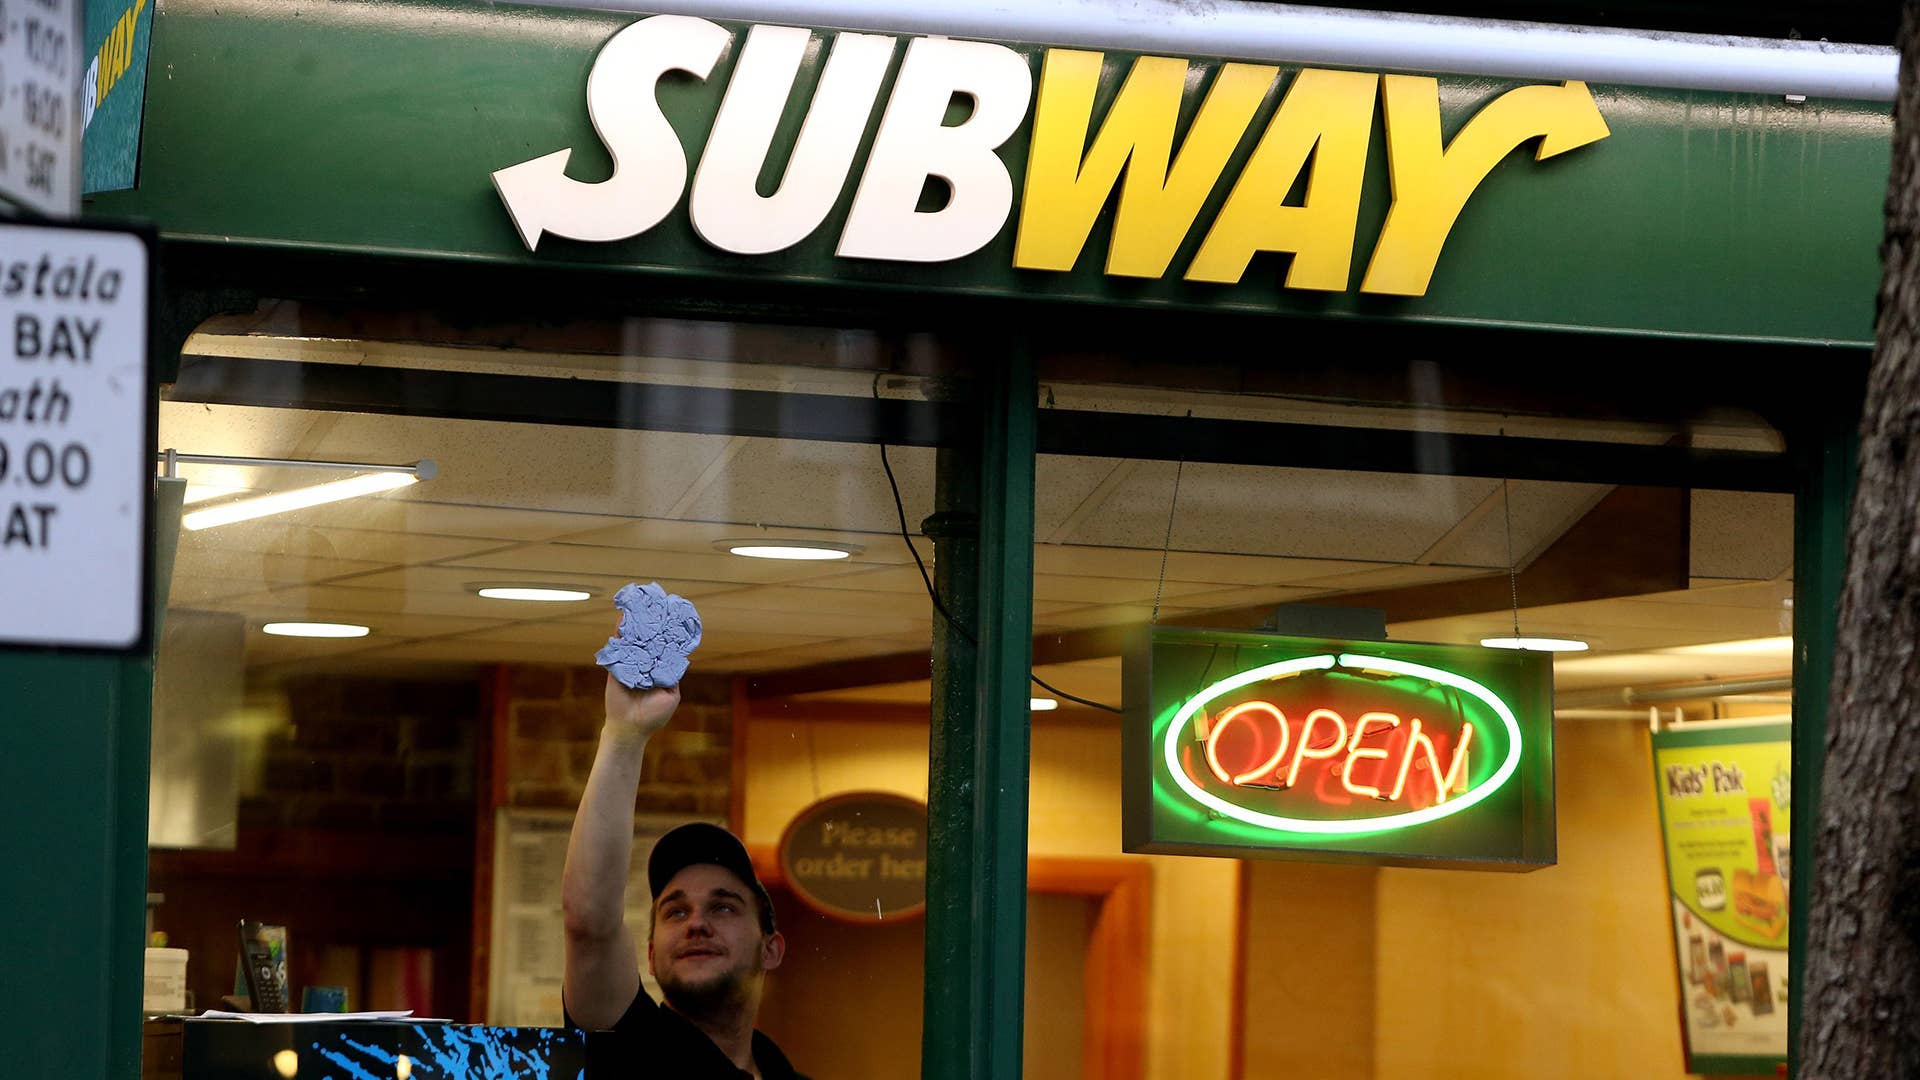 Ireland Rules That Subway Bread Has Too Much Sugar to Count as